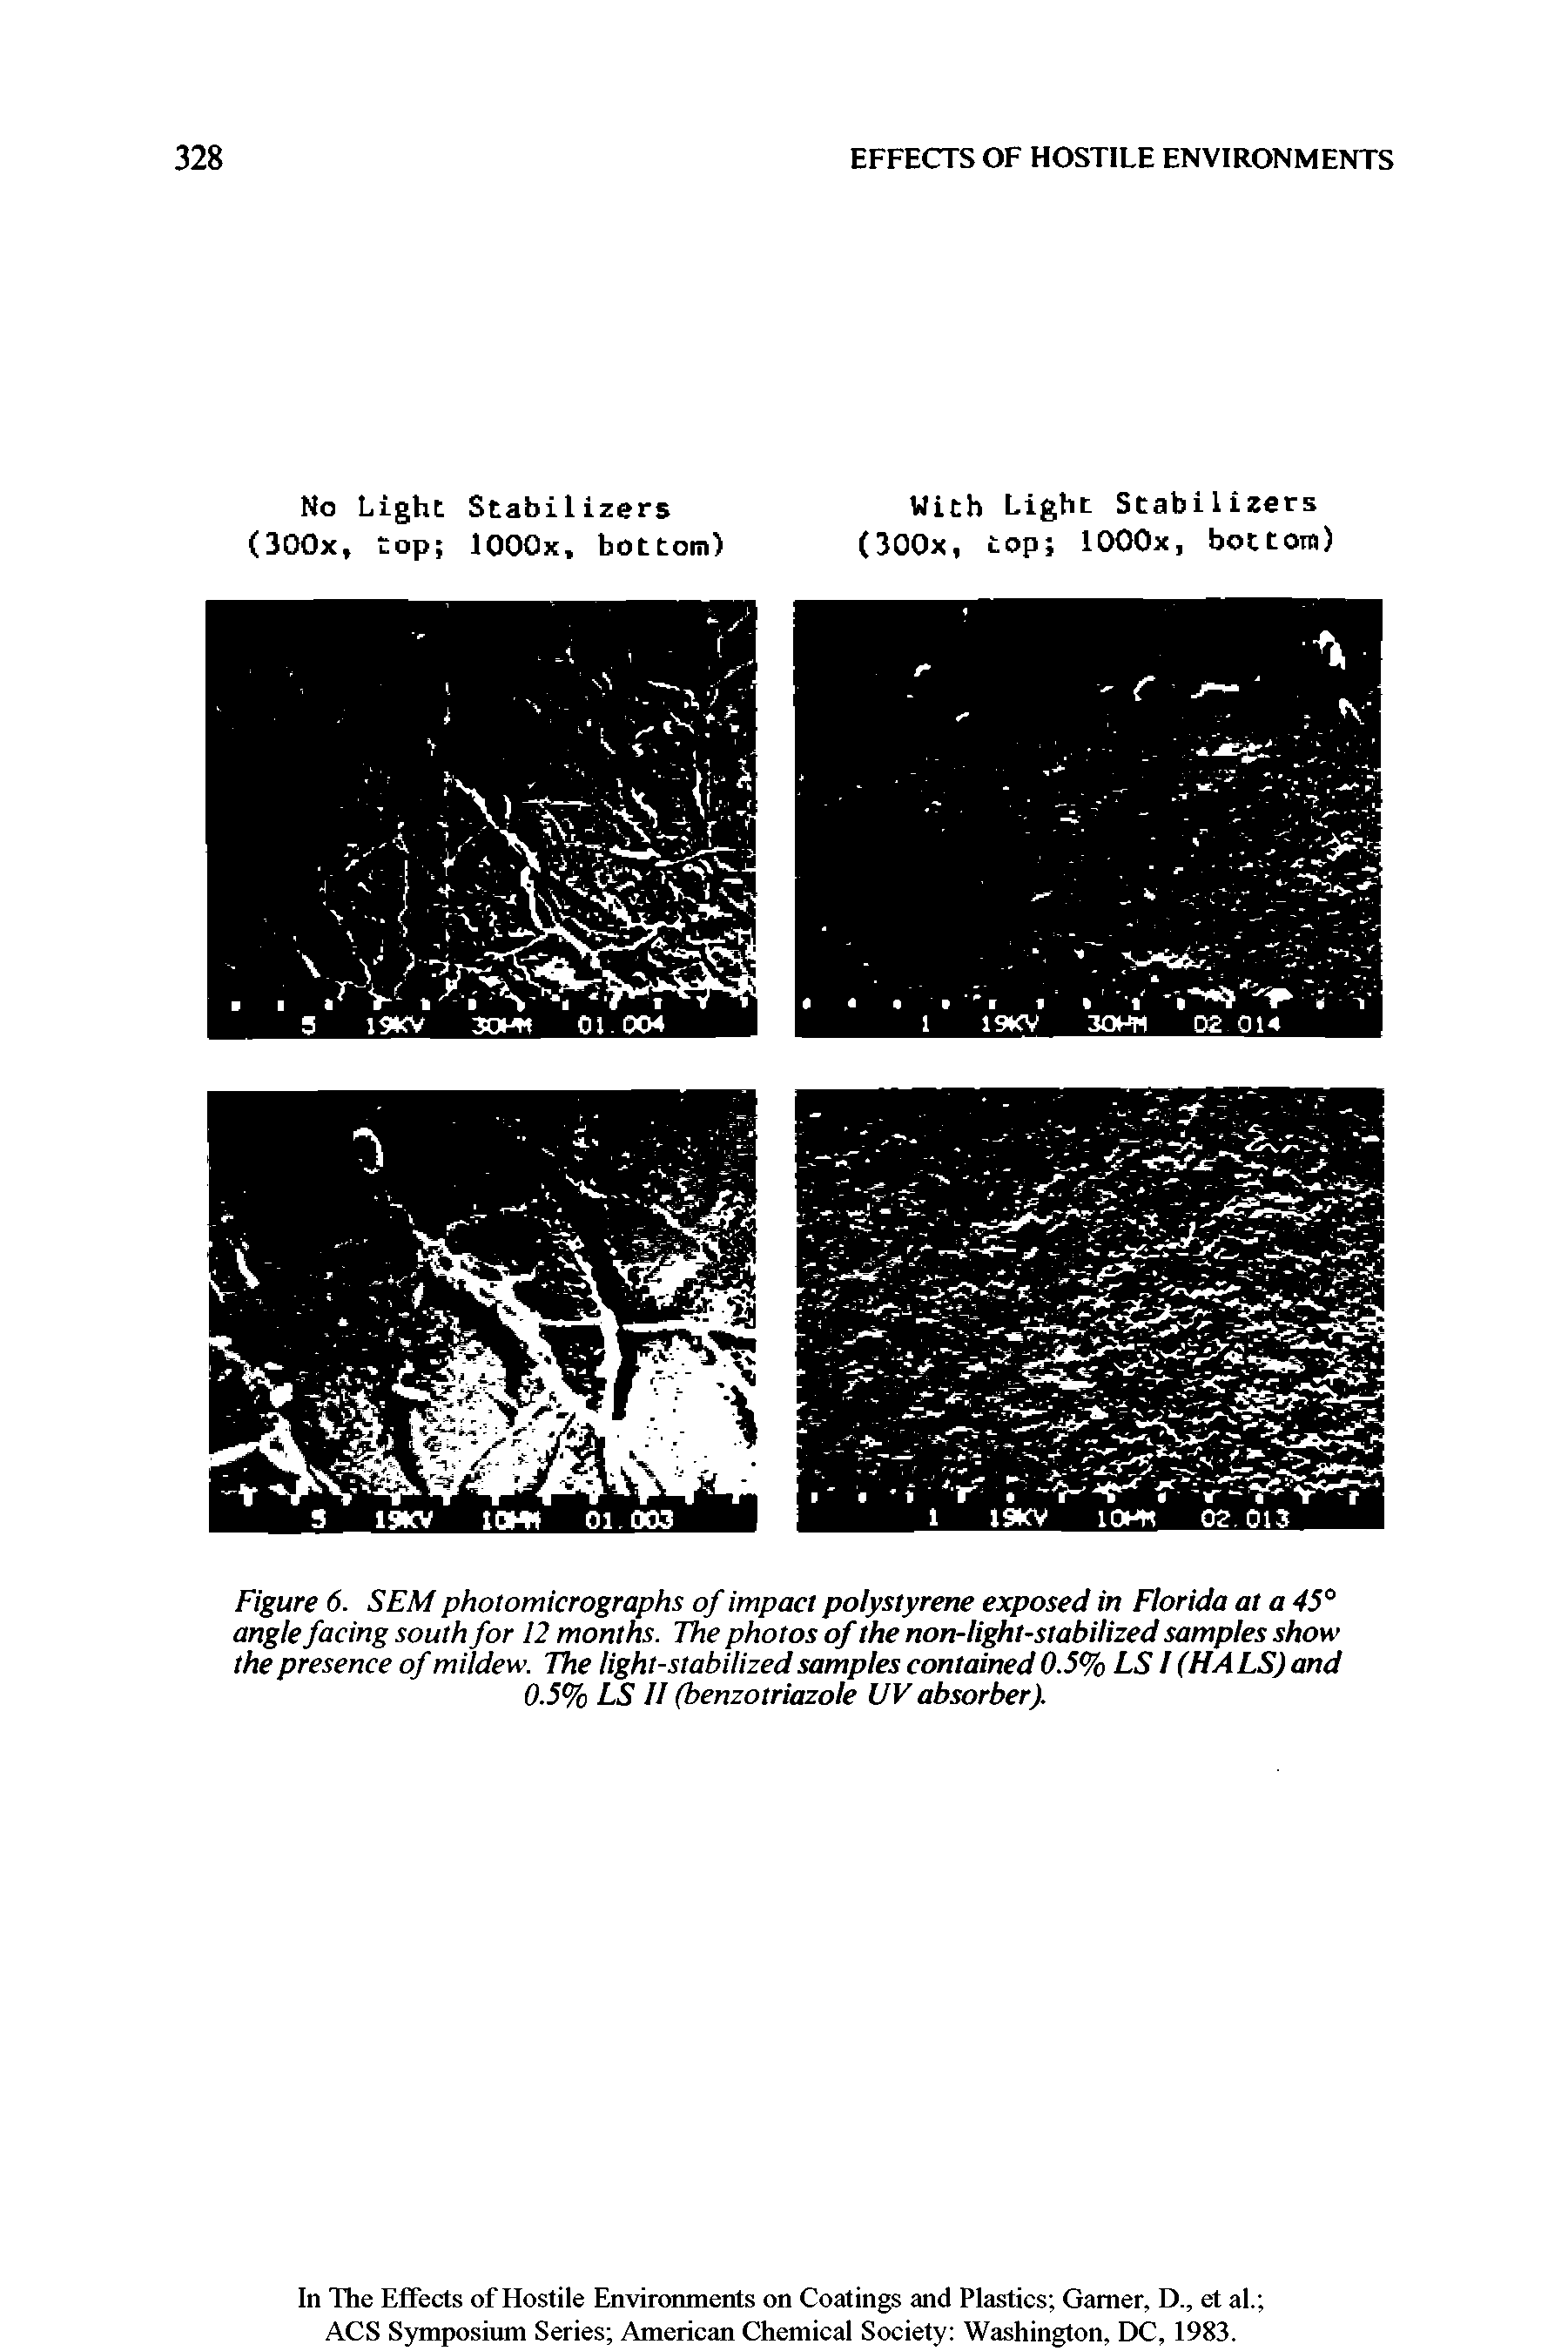 Figure 6. SEM photomicrographs of impact polystyrene exposed in Florida at a 45° angle facing south for 12 months. The photos of the non-light-stabilized samples show the presence of mildew. The light-stabilized samples contained 0.5% LS / (HA LS) and 0.5% LS I (benzotriazole UV absorber).